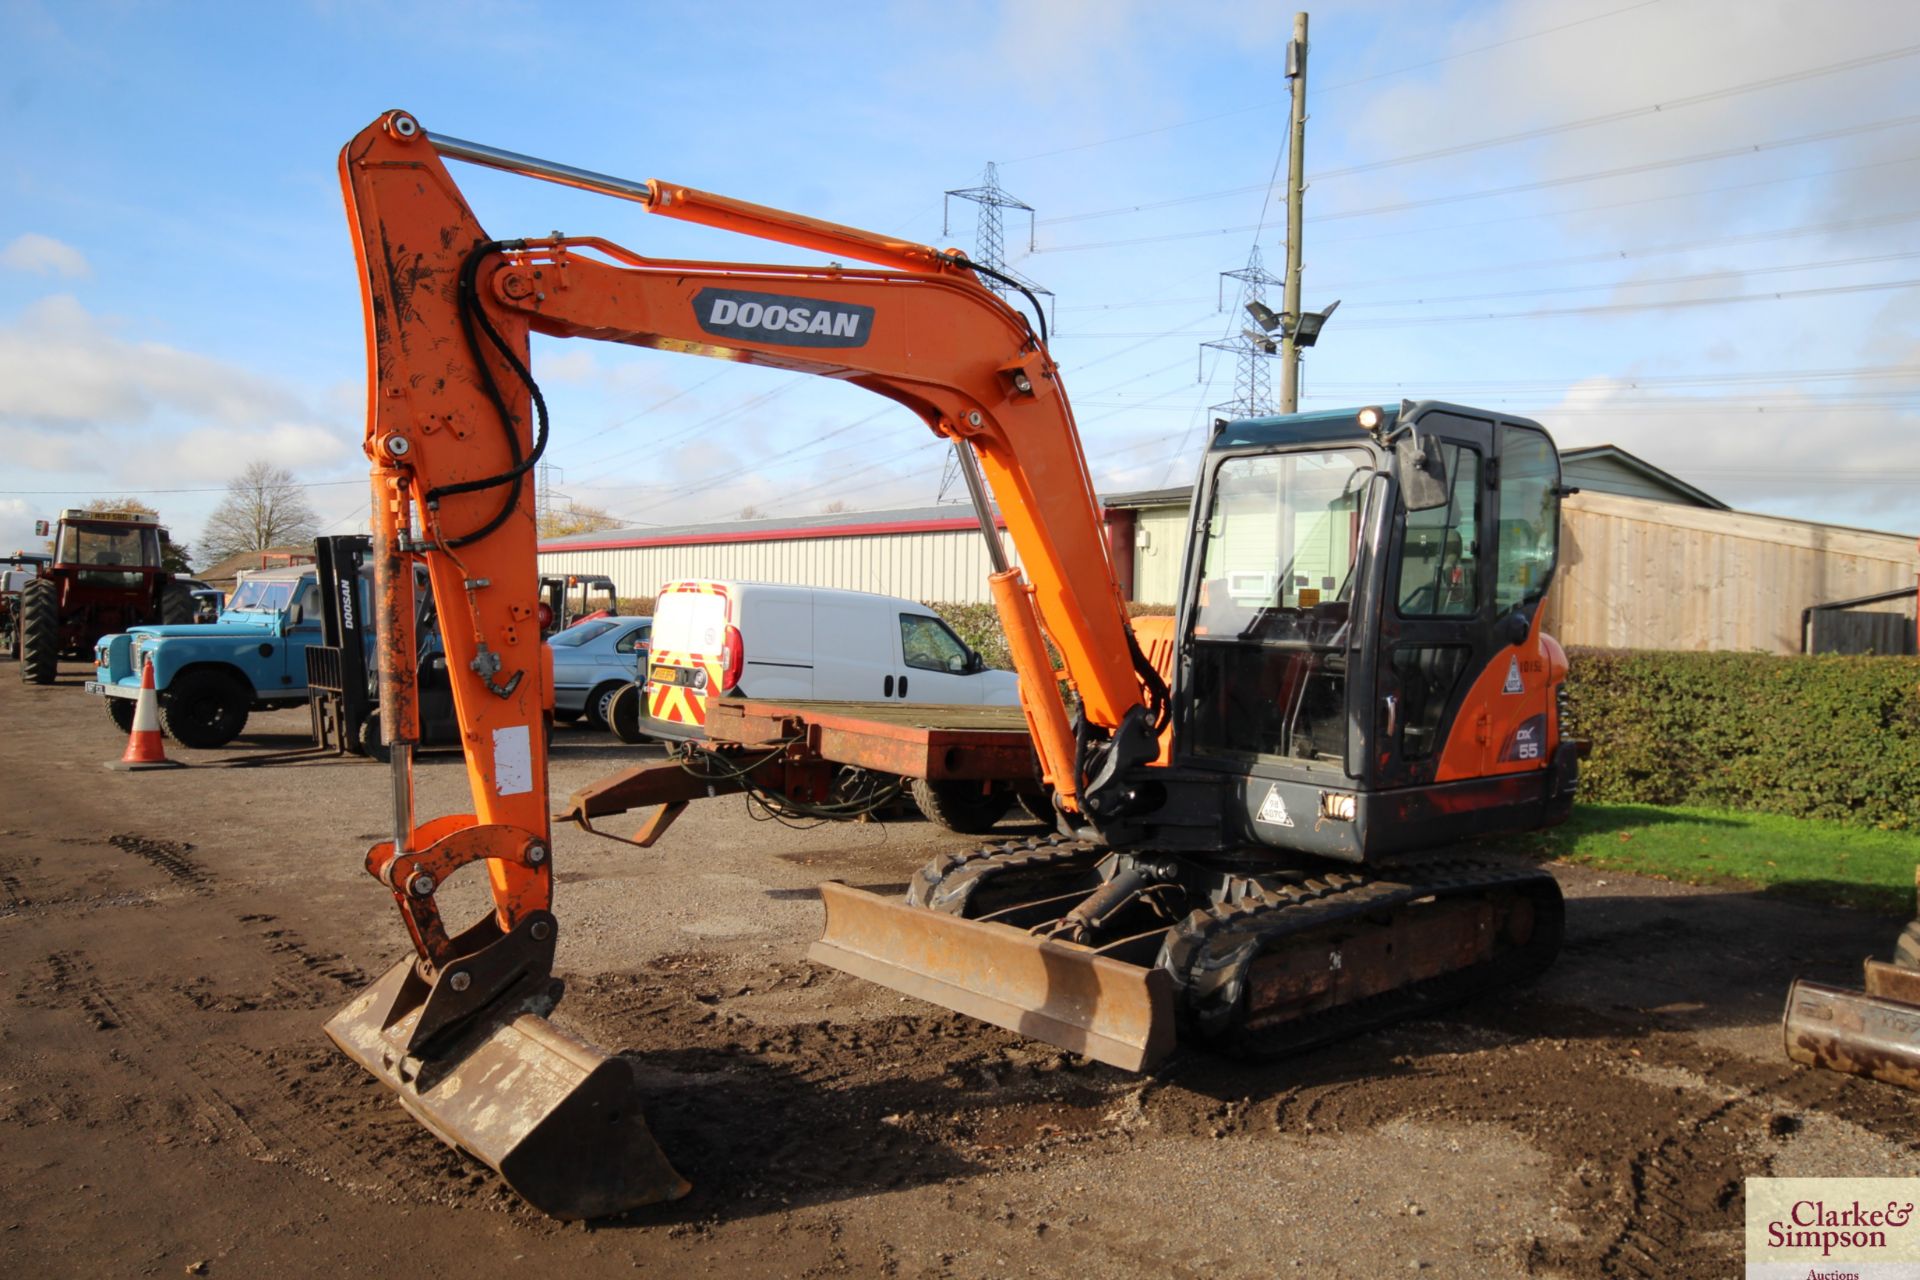 Doosan DX55E 5.5T excavator. 2011. 5,045 hours. Serial number 50461. With new rubber tracks 50 hours